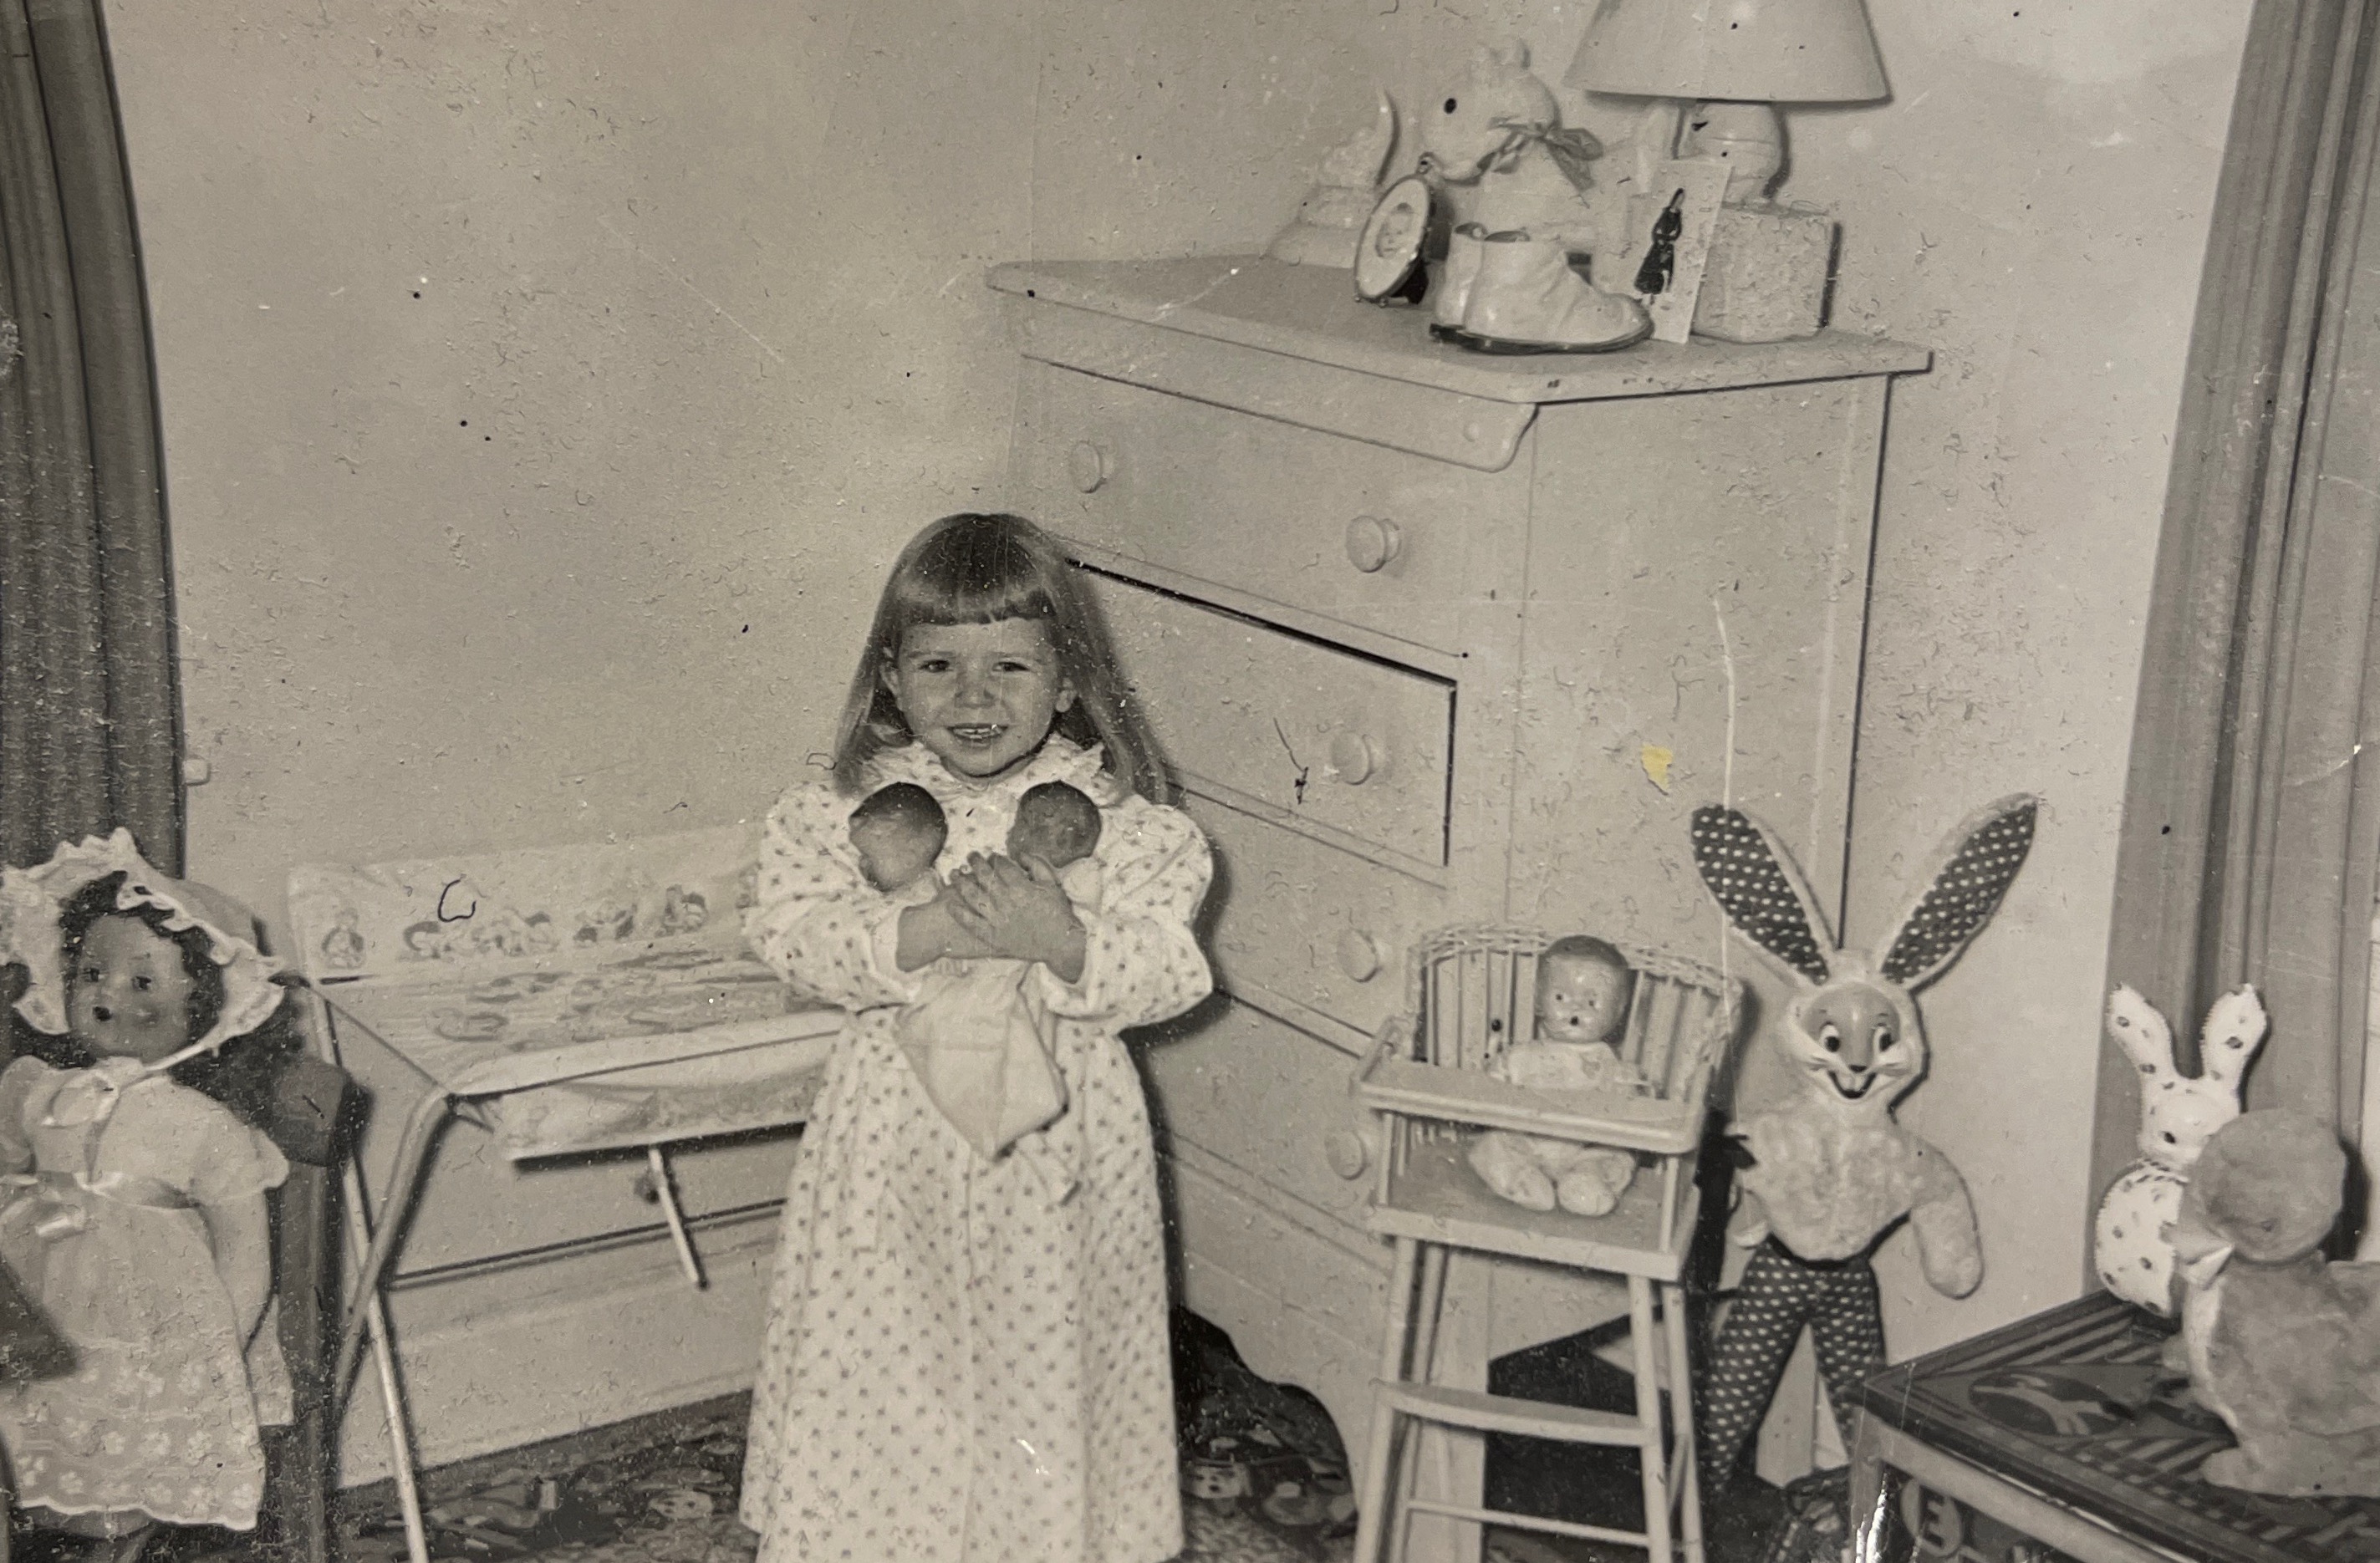 Claudia Dumas with twin dolls, December 1955. 26 years later, she would give birth to twin daughters.